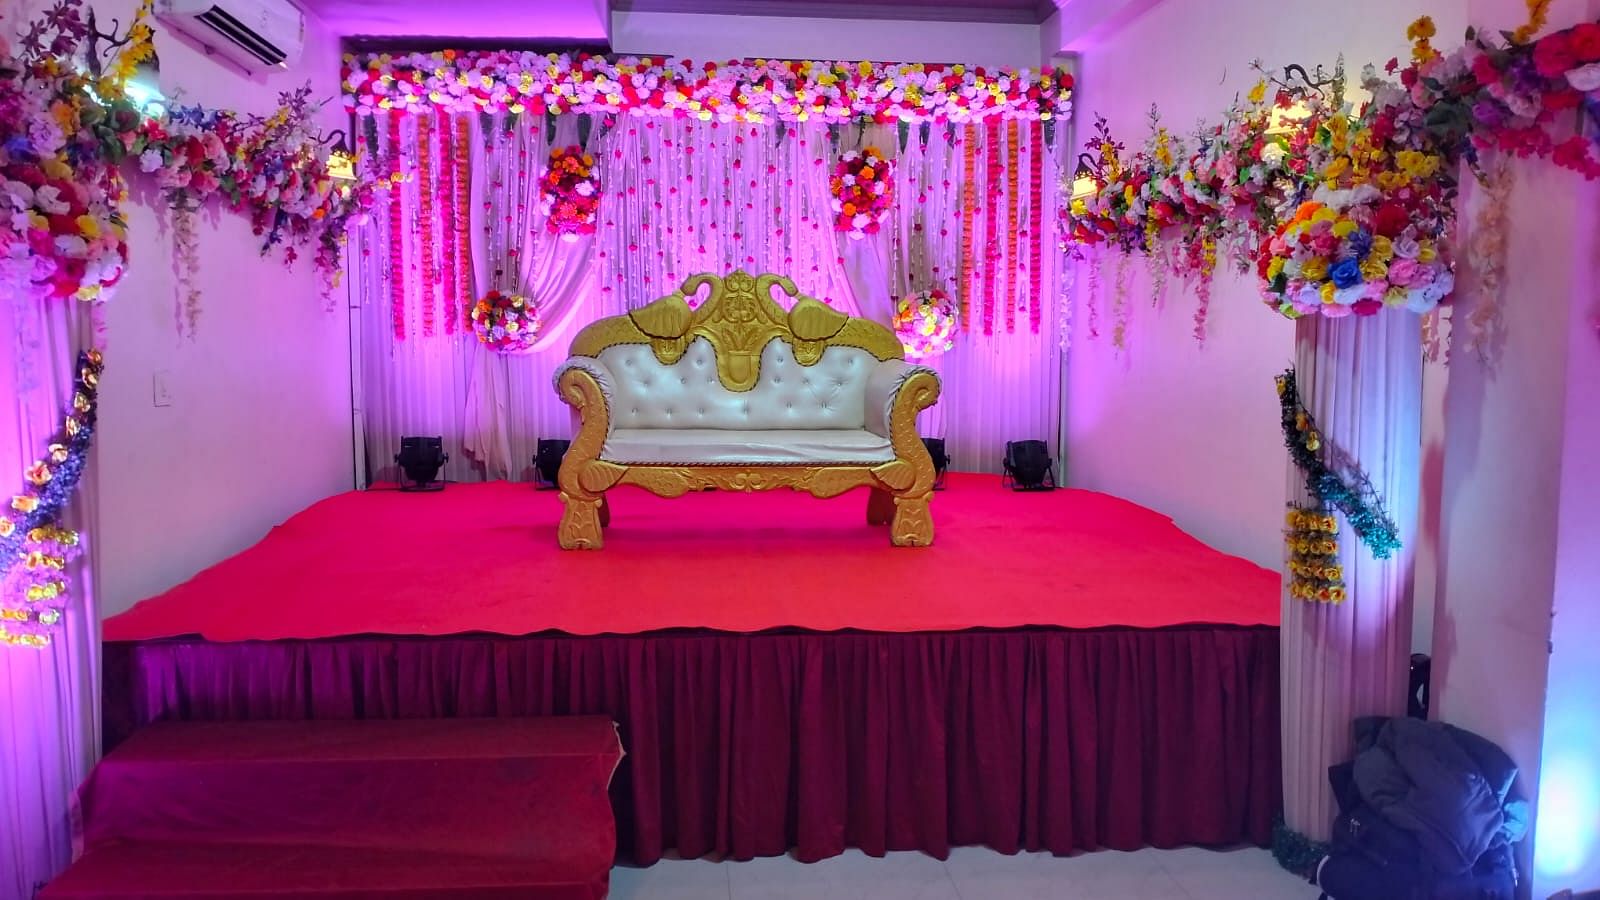 Saffron Banquet And Best Party Hall In Noida By City Stay in Sector 22, Noida